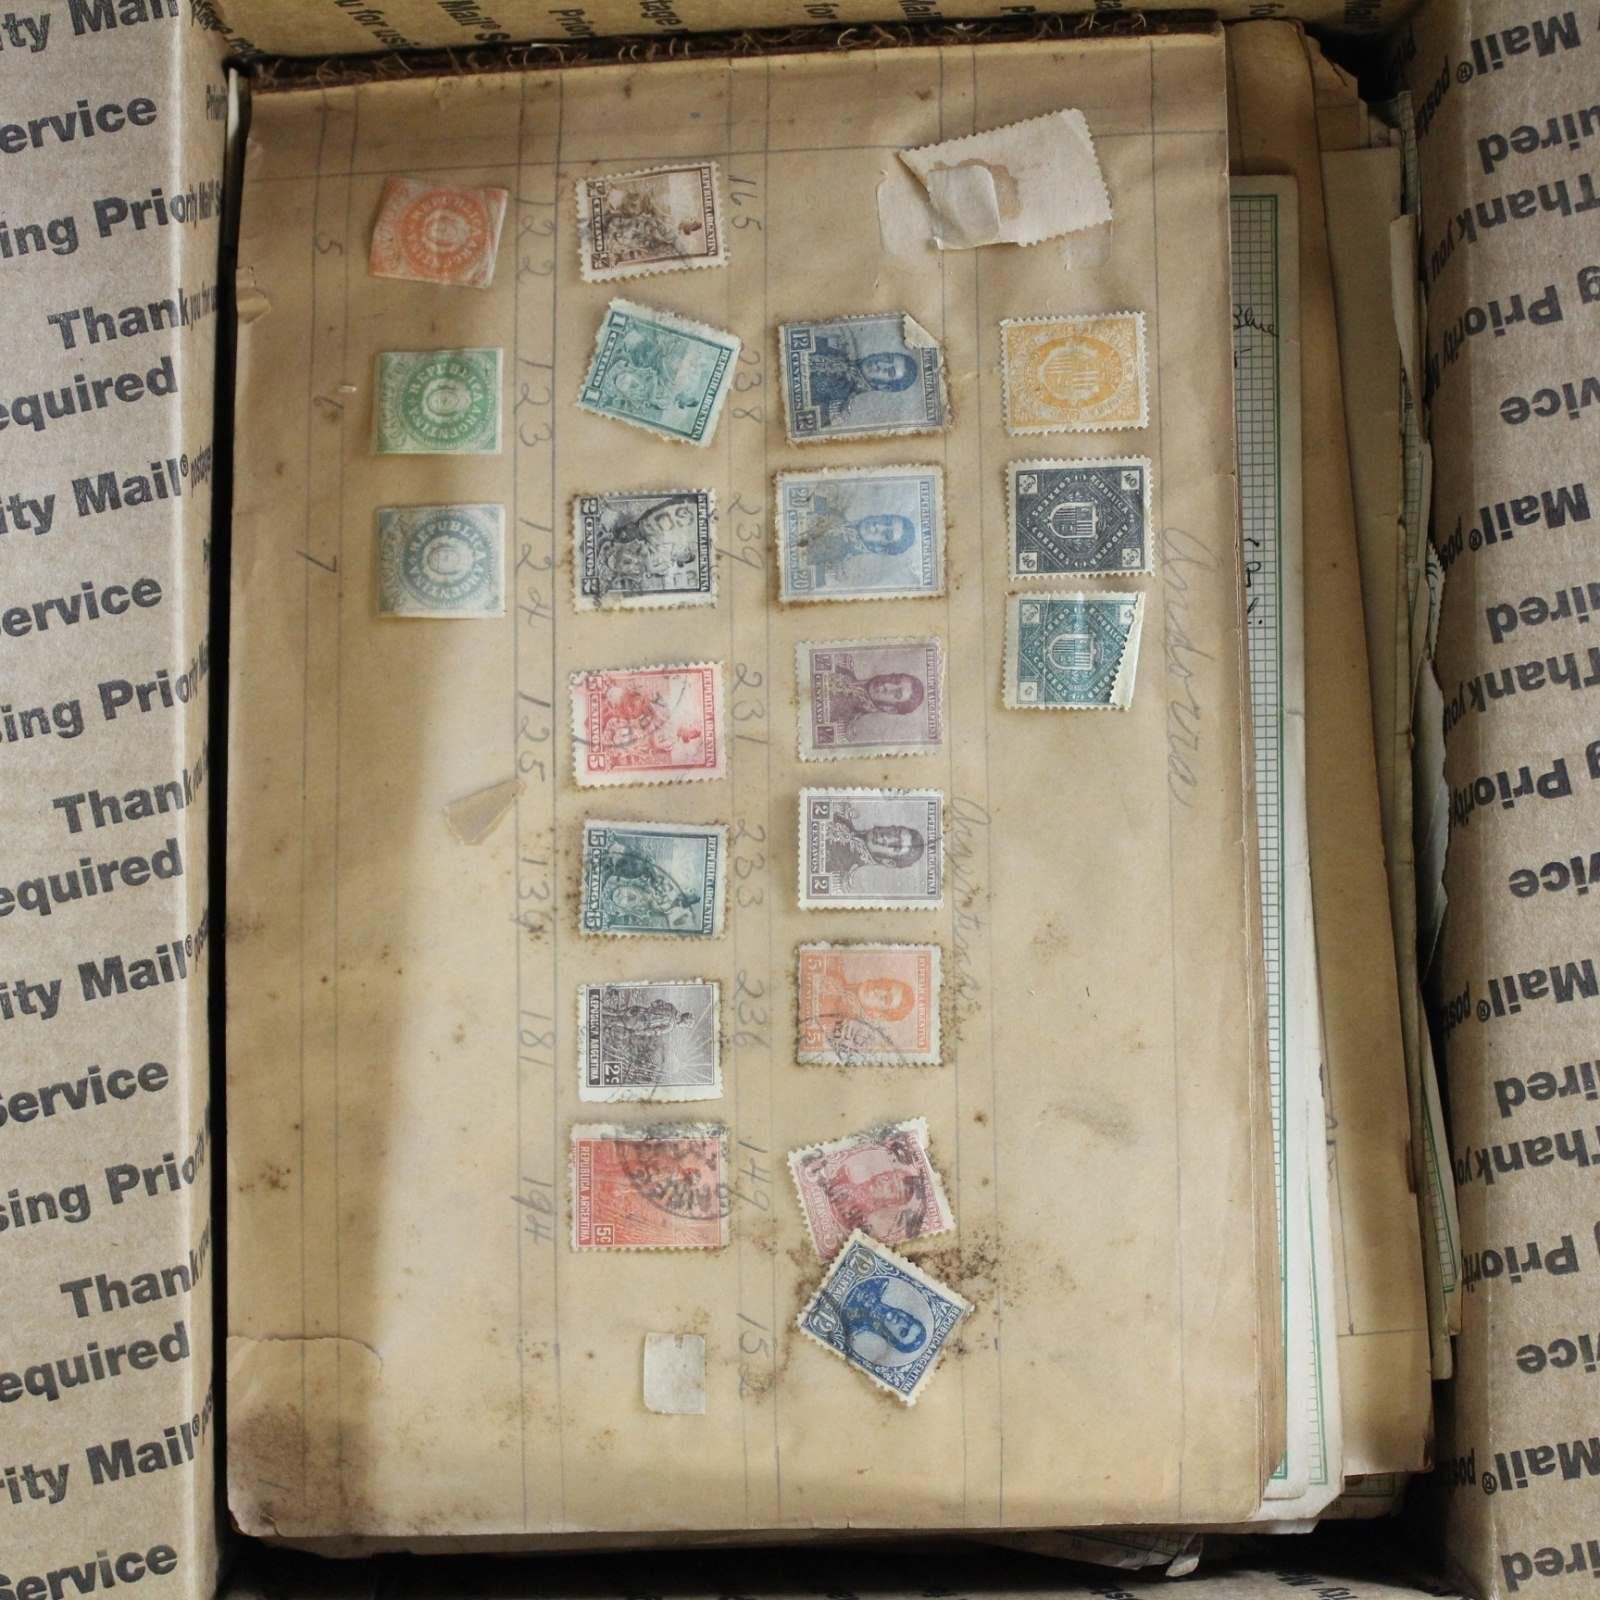 April 12th, 2020 Weekly Stamps & Collectibles Auction